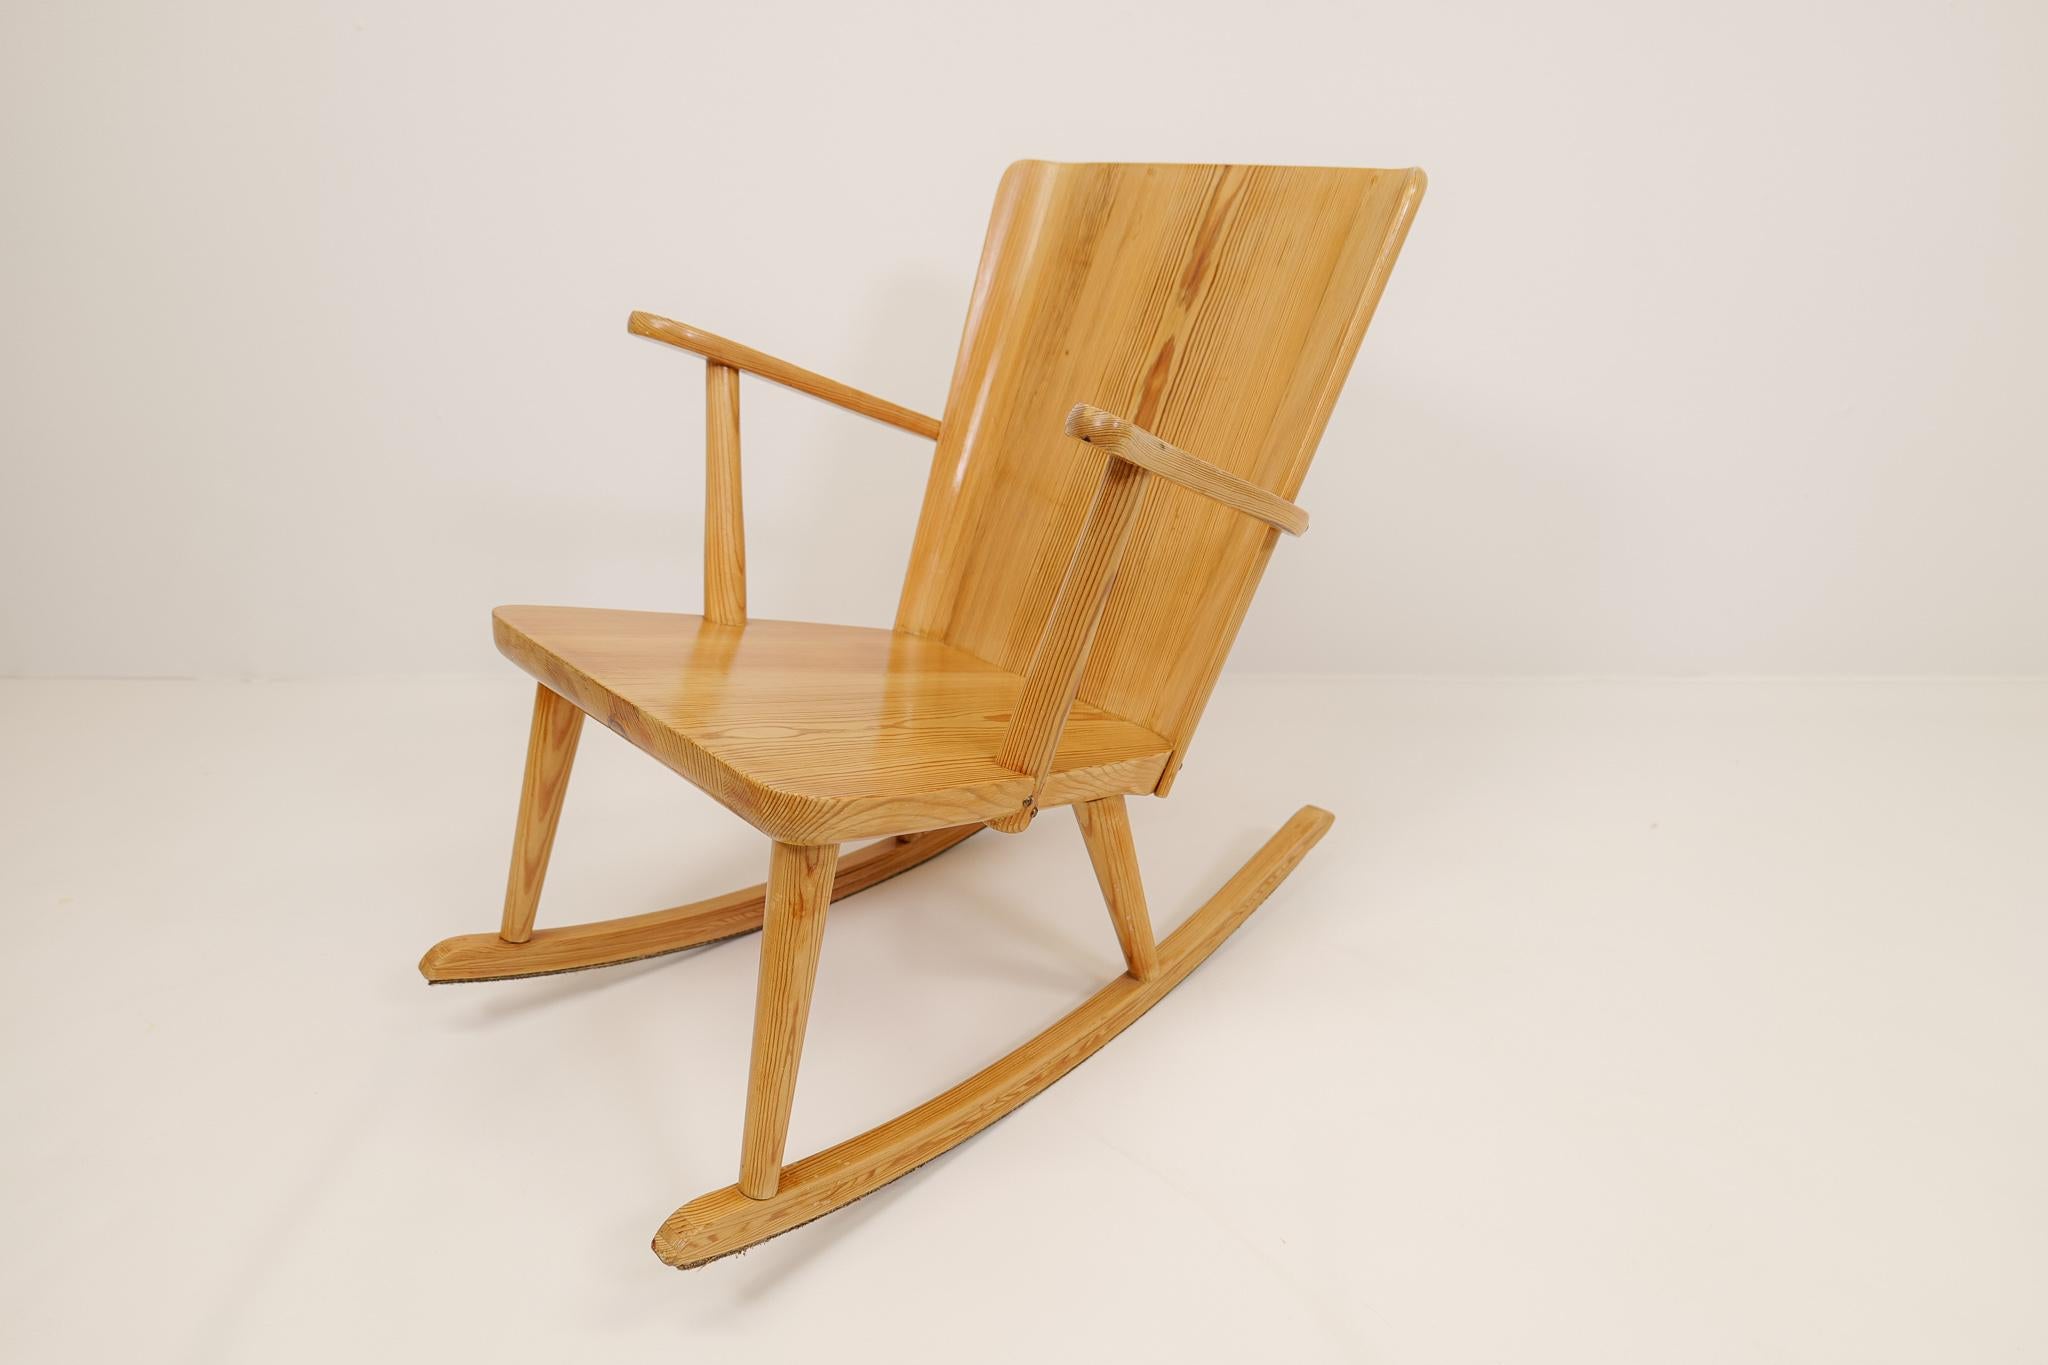 Midcentury Rocking Chair in Pine, Göran Malmvall, Sweden, 1940s In Fair Condition For Sale In Hillringsberg, SE